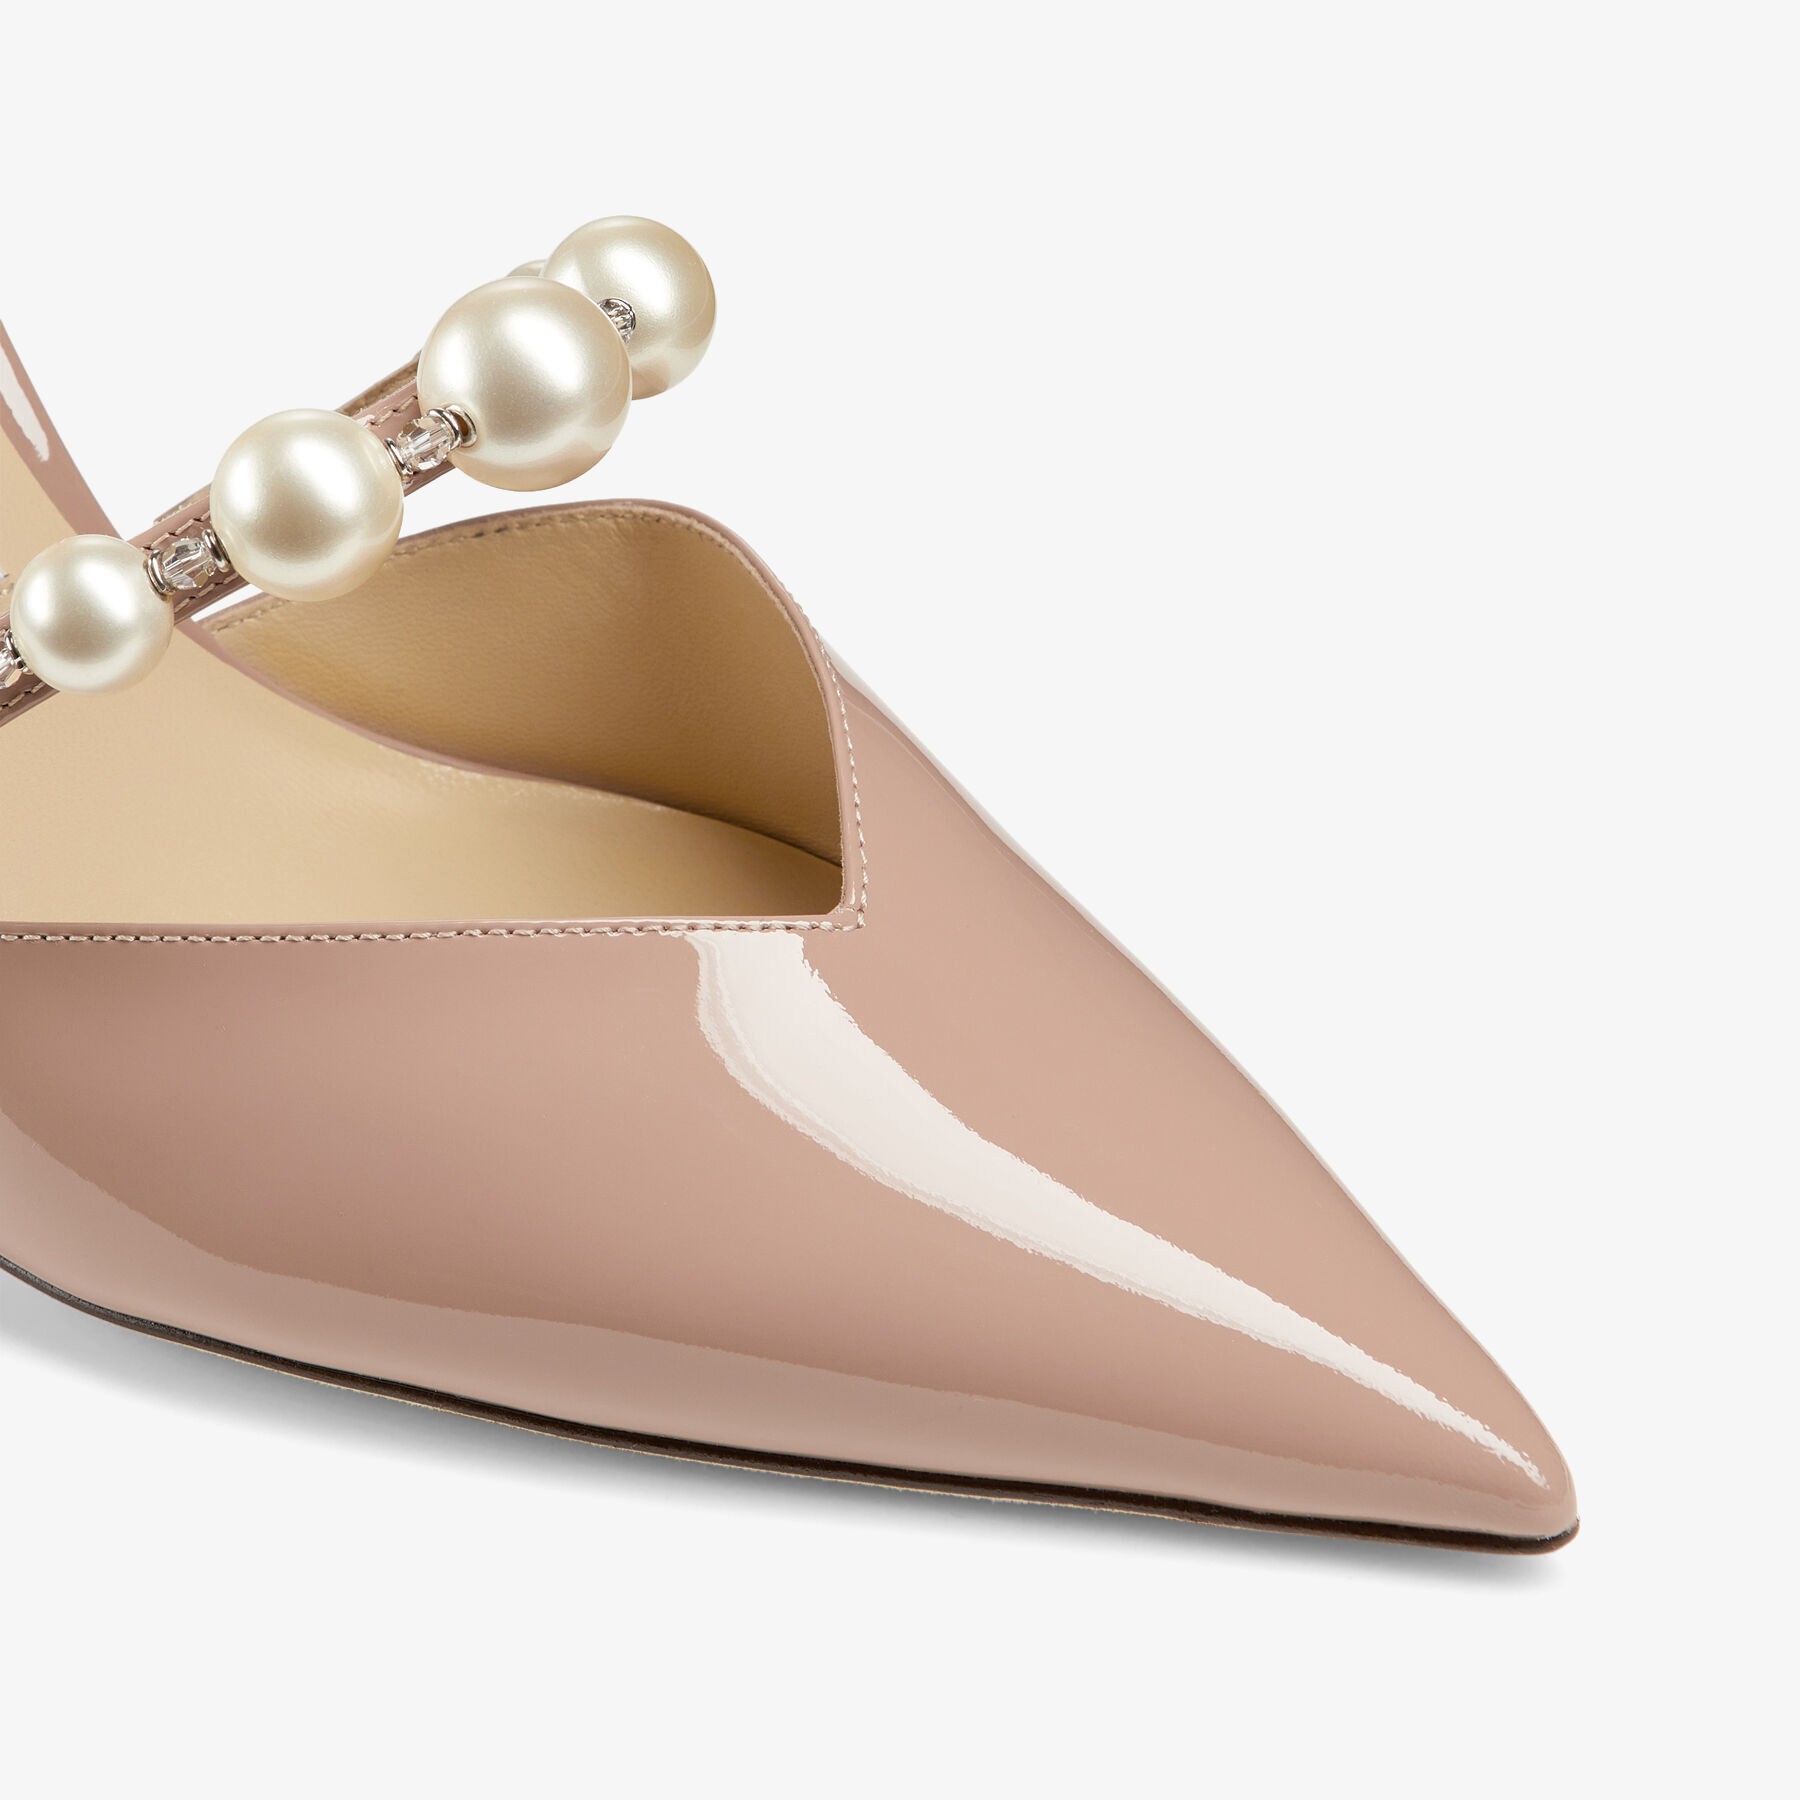 Ballet Pink Patent Leather Pointed Pumps with Pearl Embellishment 